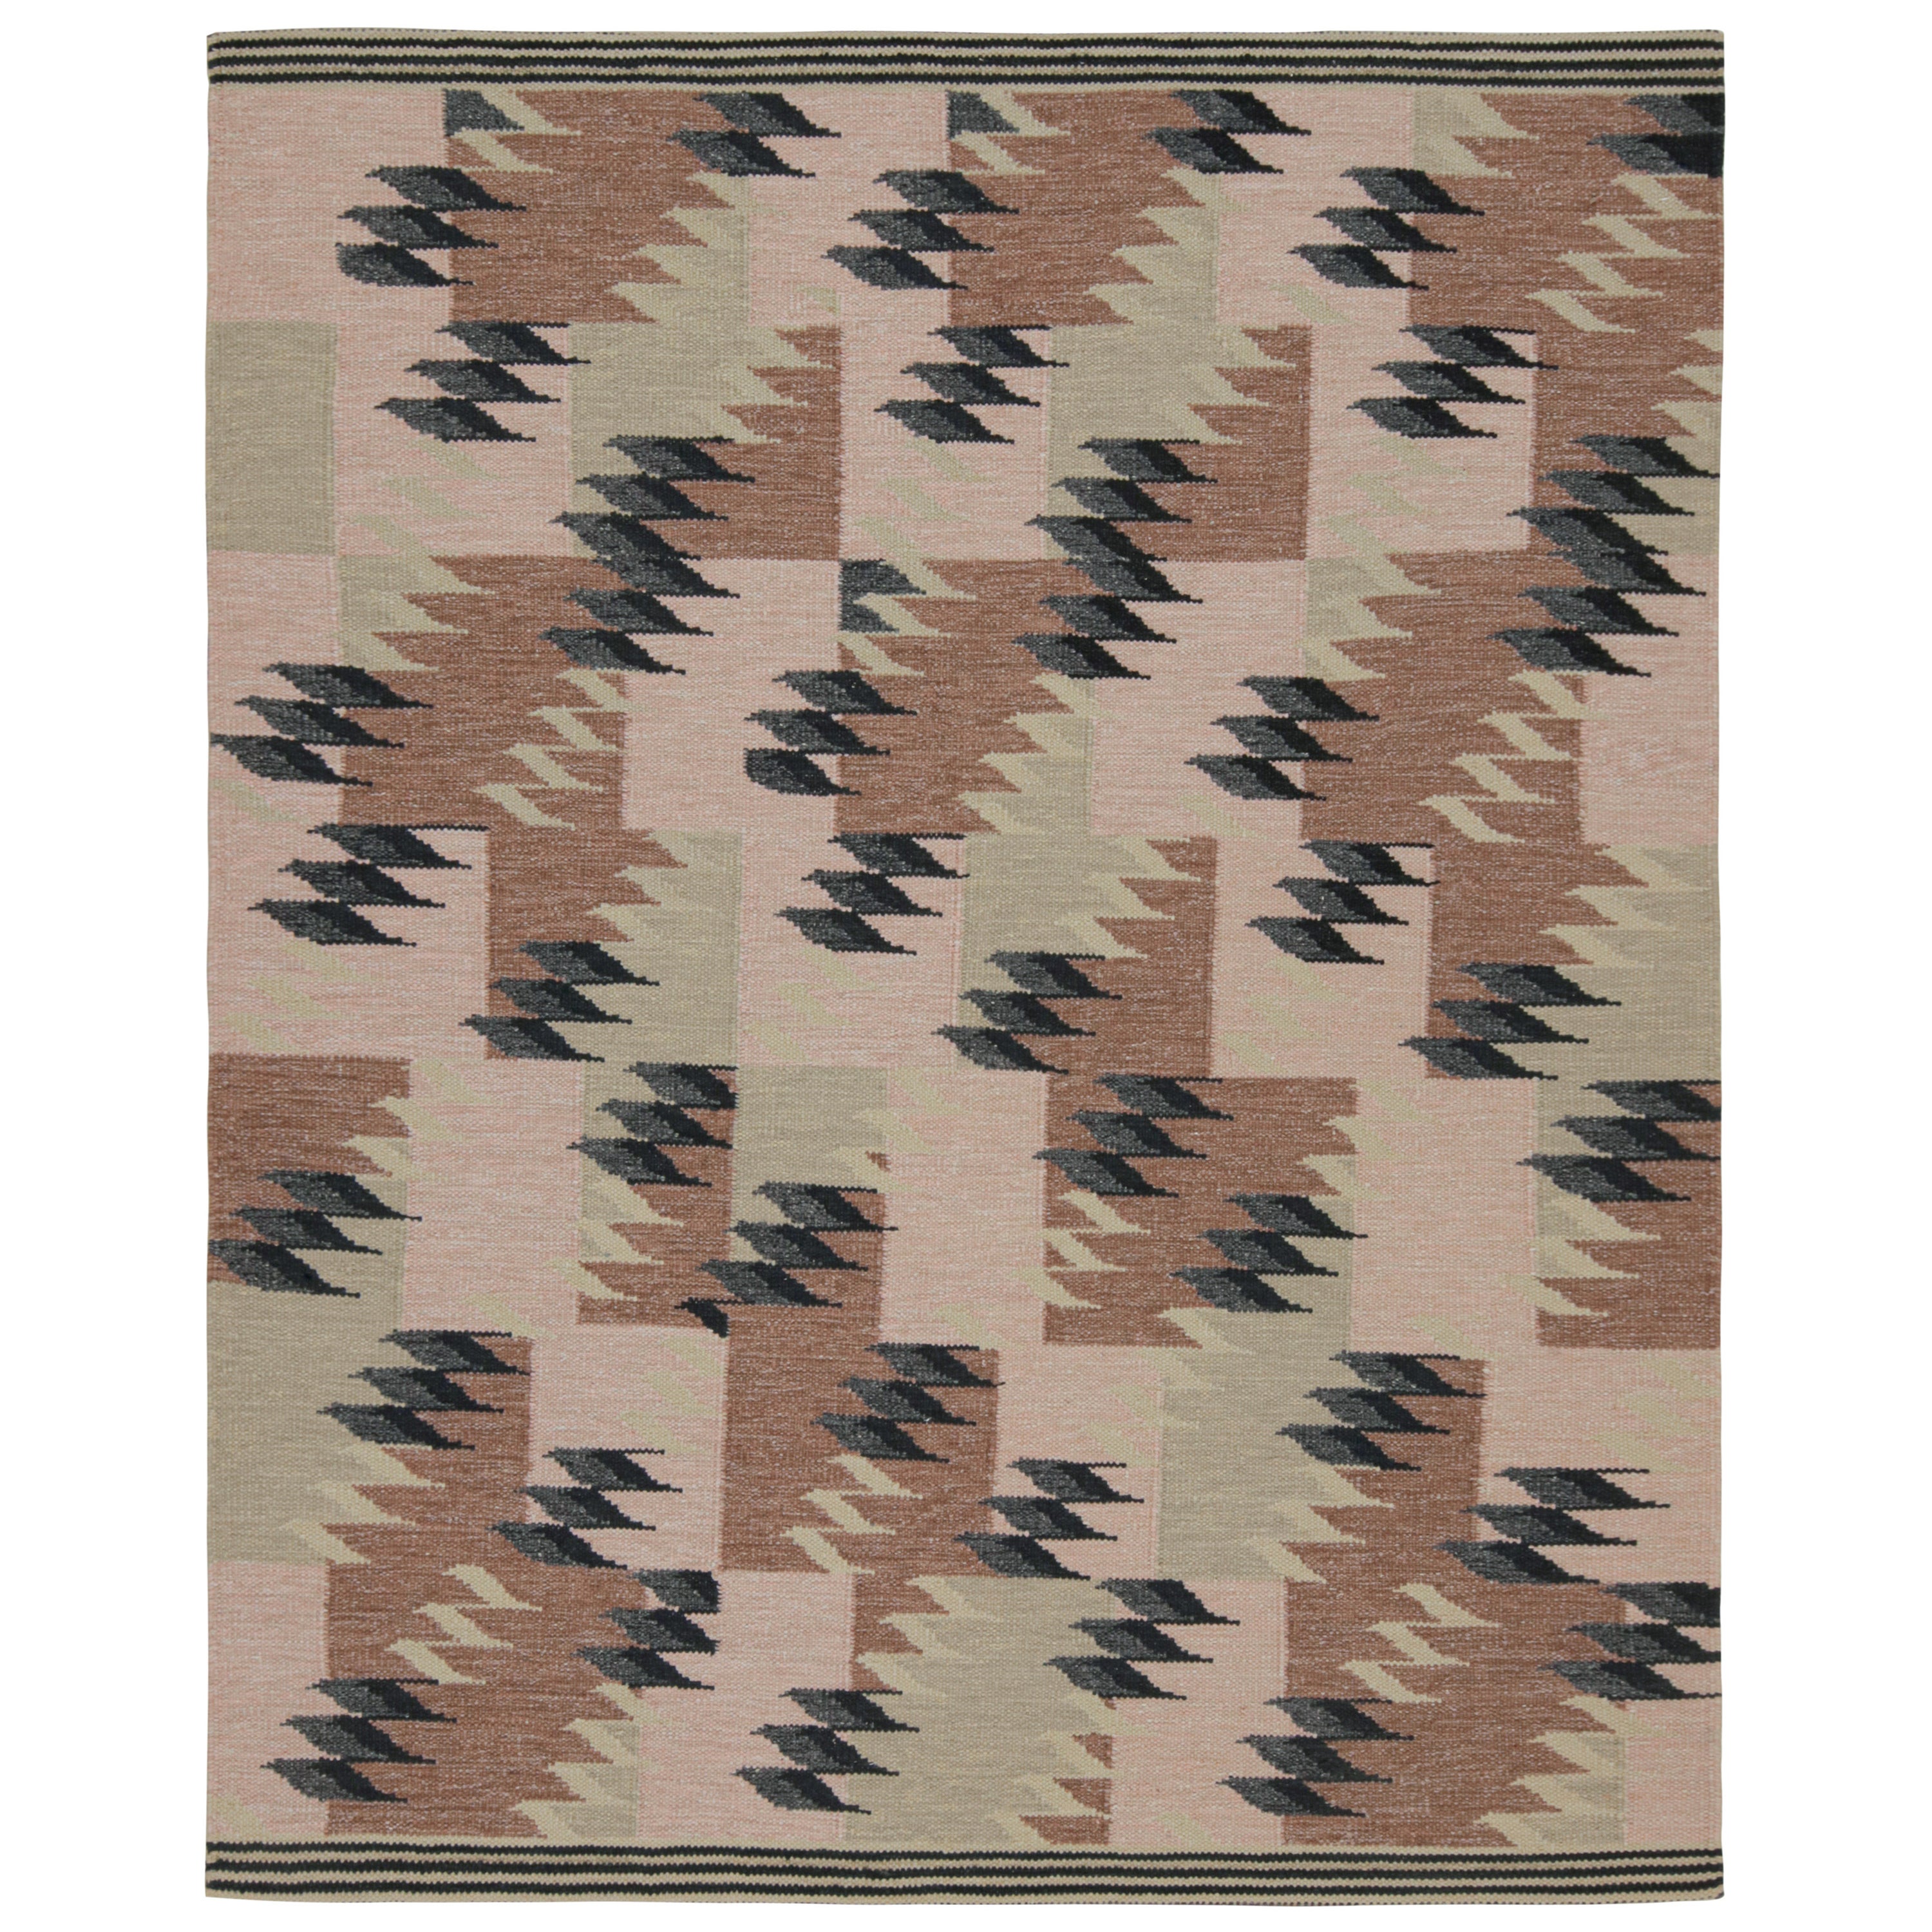 Rug & Kilim’s Scandinavian Style Kilim with Beige-Brown & Green Patterns For Sale